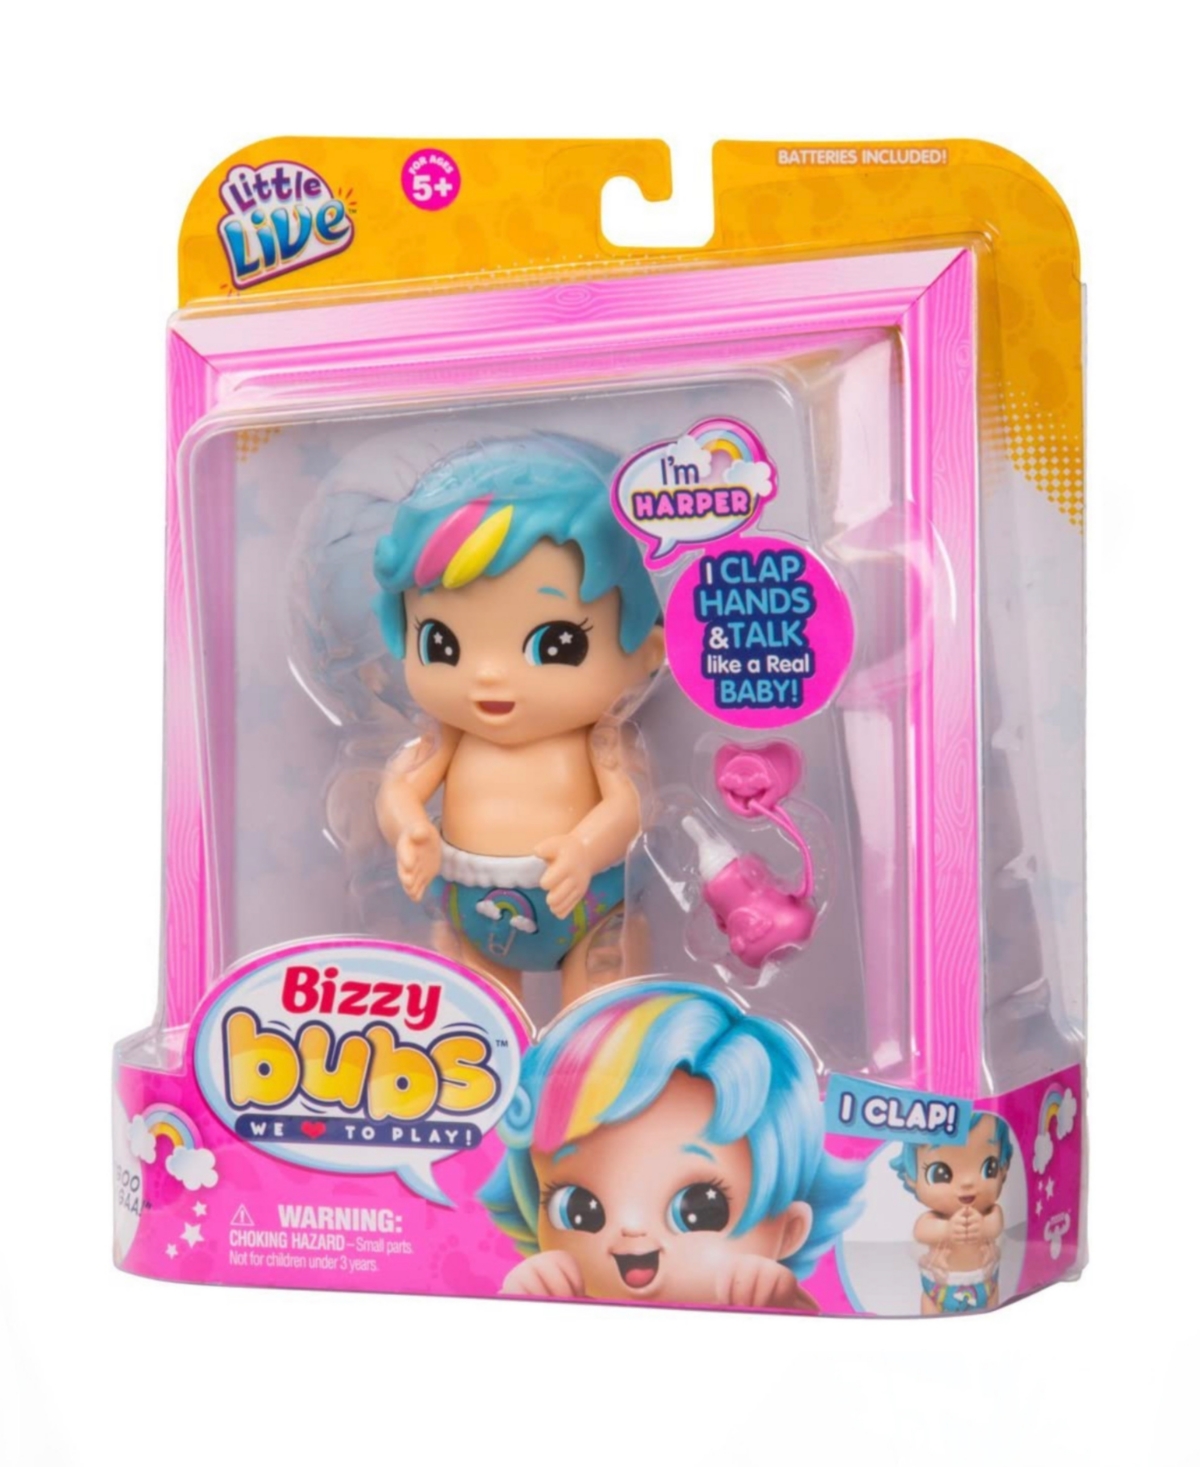 Little Live Kids' Babies Baby Harper Tiny Doll In Multi Colored